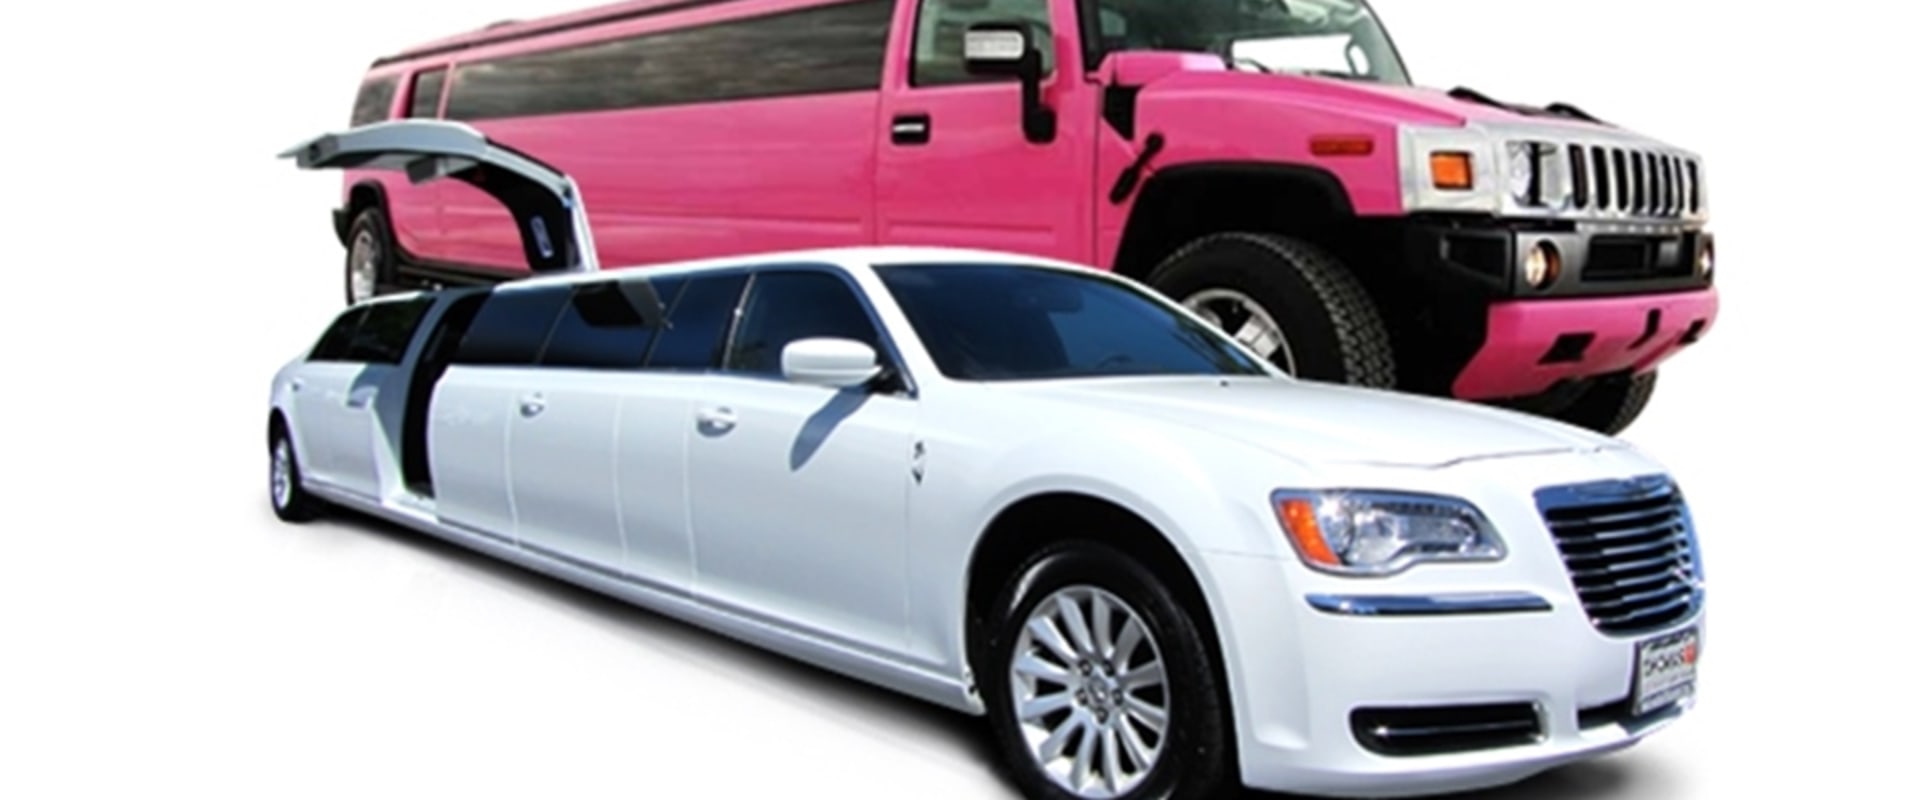 Experience the Fun and Excitement of Tarrant County with Limousine Service